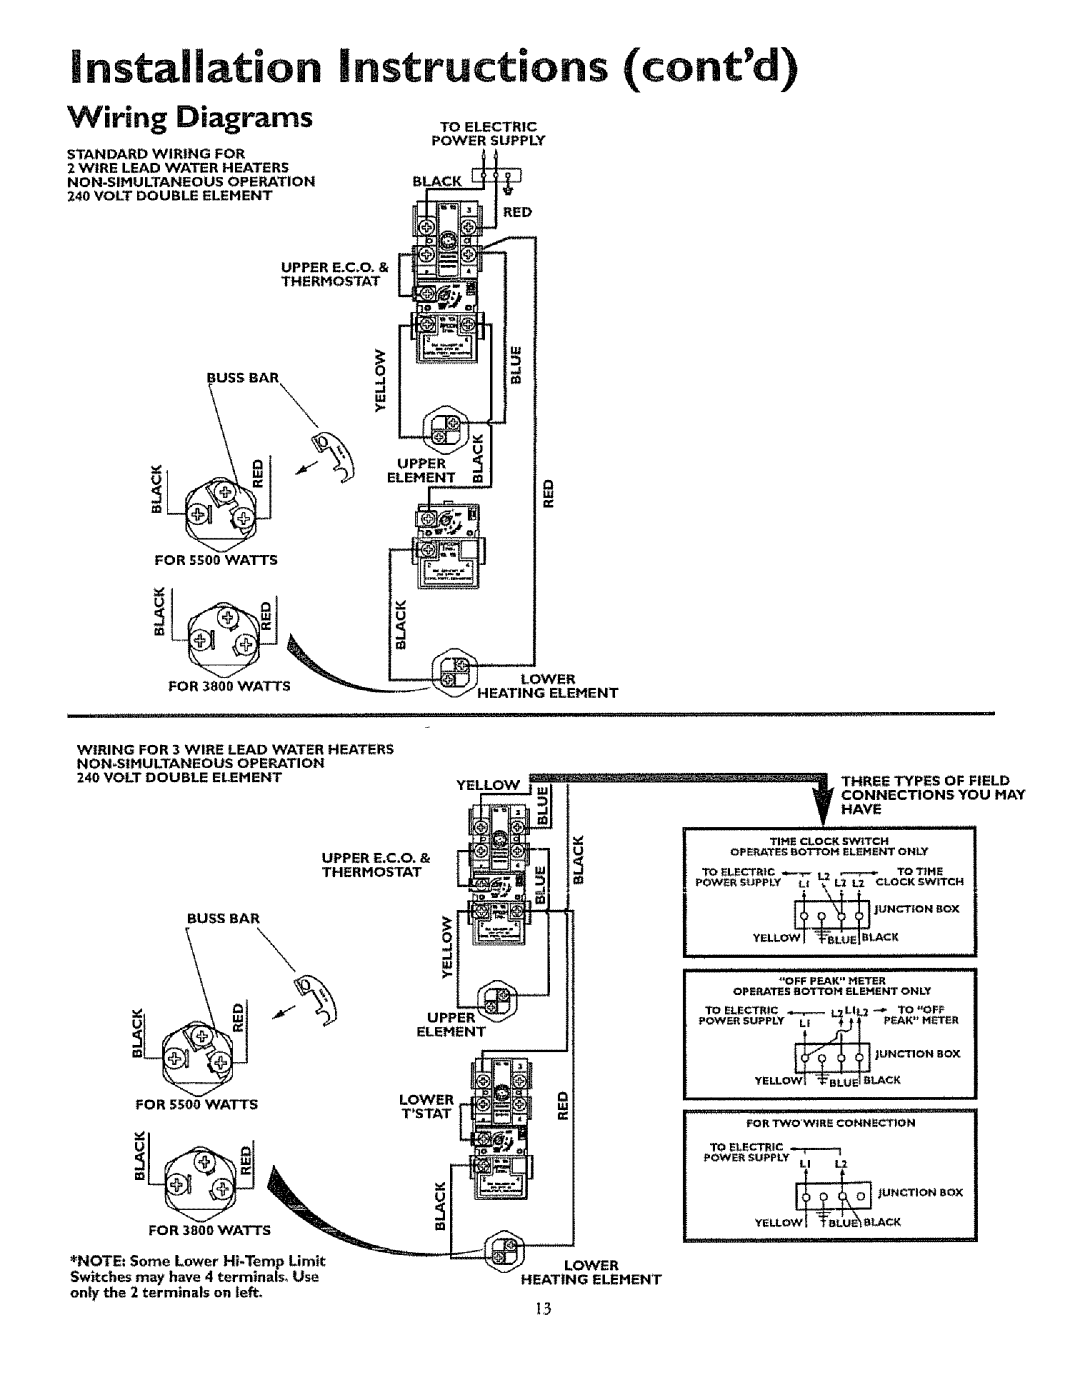 Kenmore 153.327565 50 GAL, SHORT, 153.327865 installation Instructions contd, OR,,00WATTS, Wiling Diagrams, Connect,Onsmay 